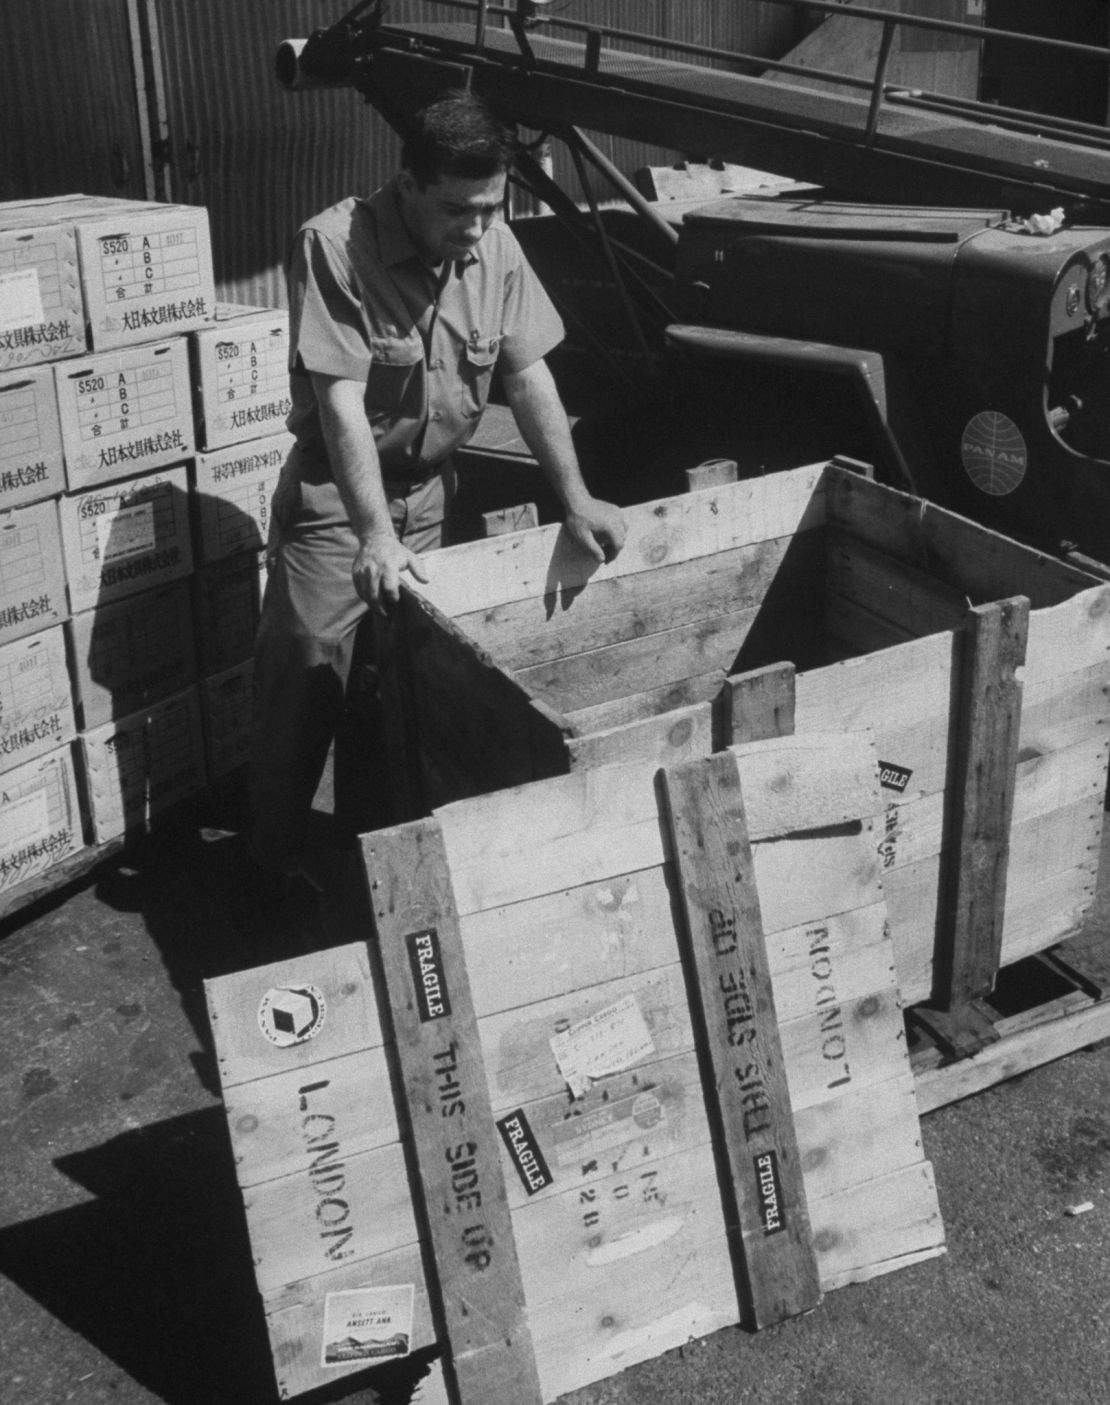 A Pan Am service representative examines the crate that Brian Robson was found in back in 1965.